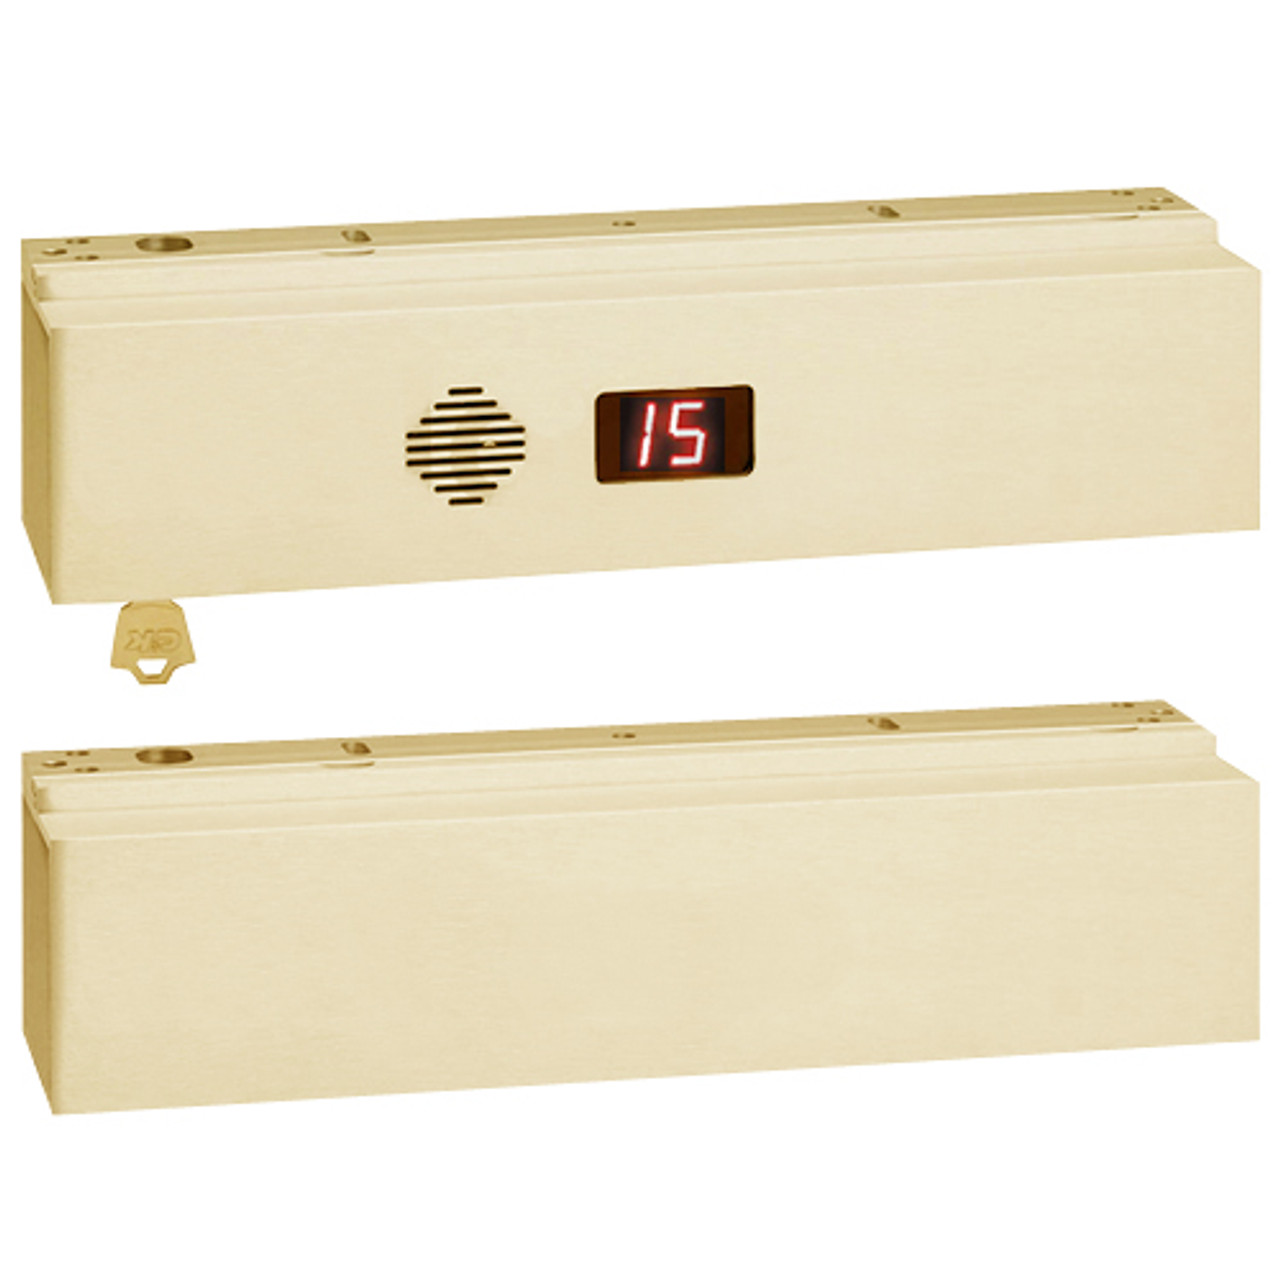 1511T-ND-K-C-B2A2 SDC 1511T Series Tandem Integrated Delayed Egress Locks with Magnetic Bond Sensor and Anti-Tamper Switch in Brass Powder